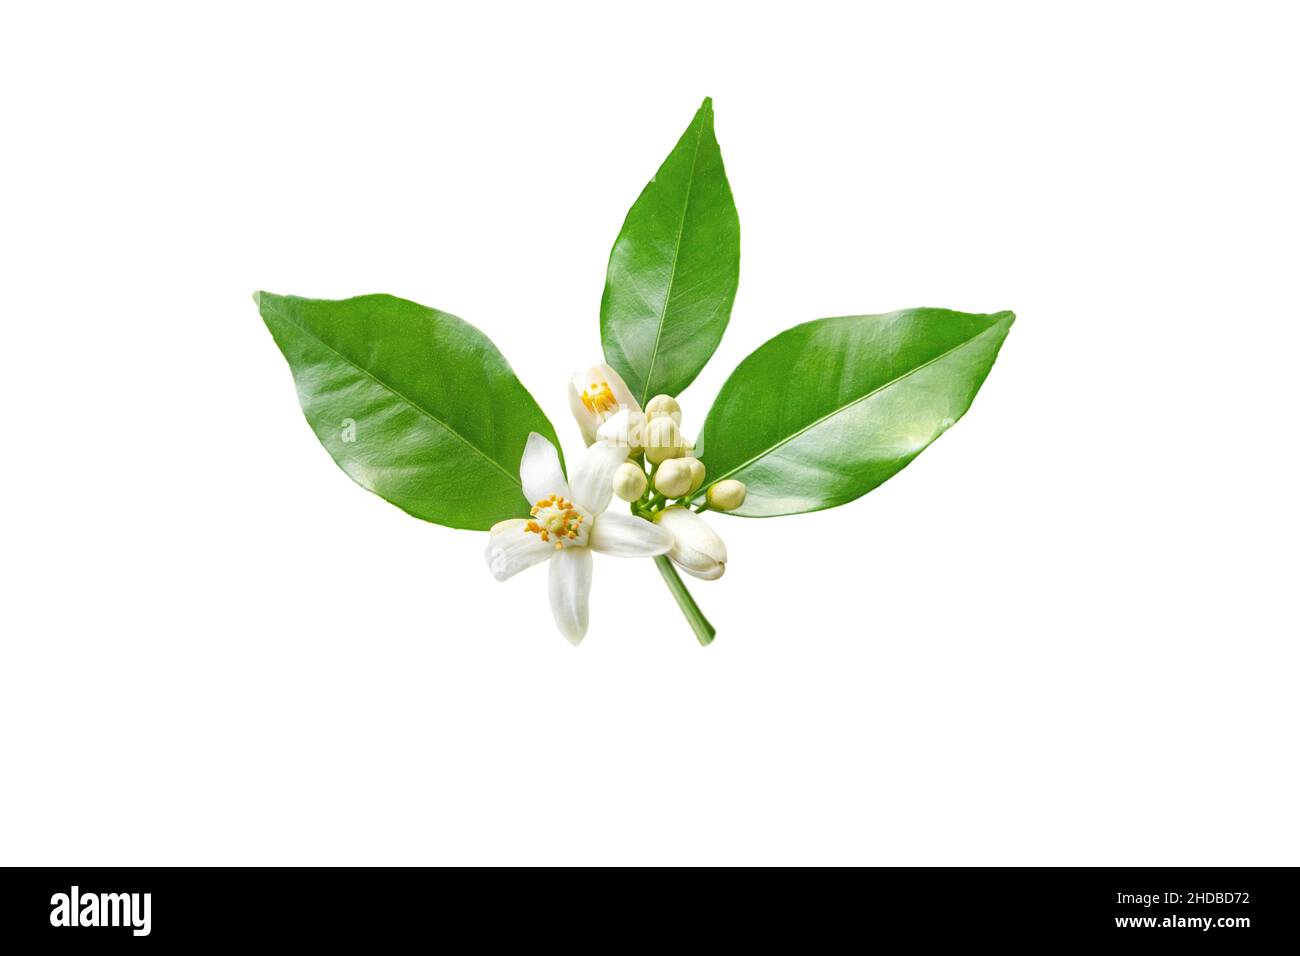 Orange tree branch with white flowers and buds isolated on white. Neroli blossom. Citrus bloom. Stock Photo